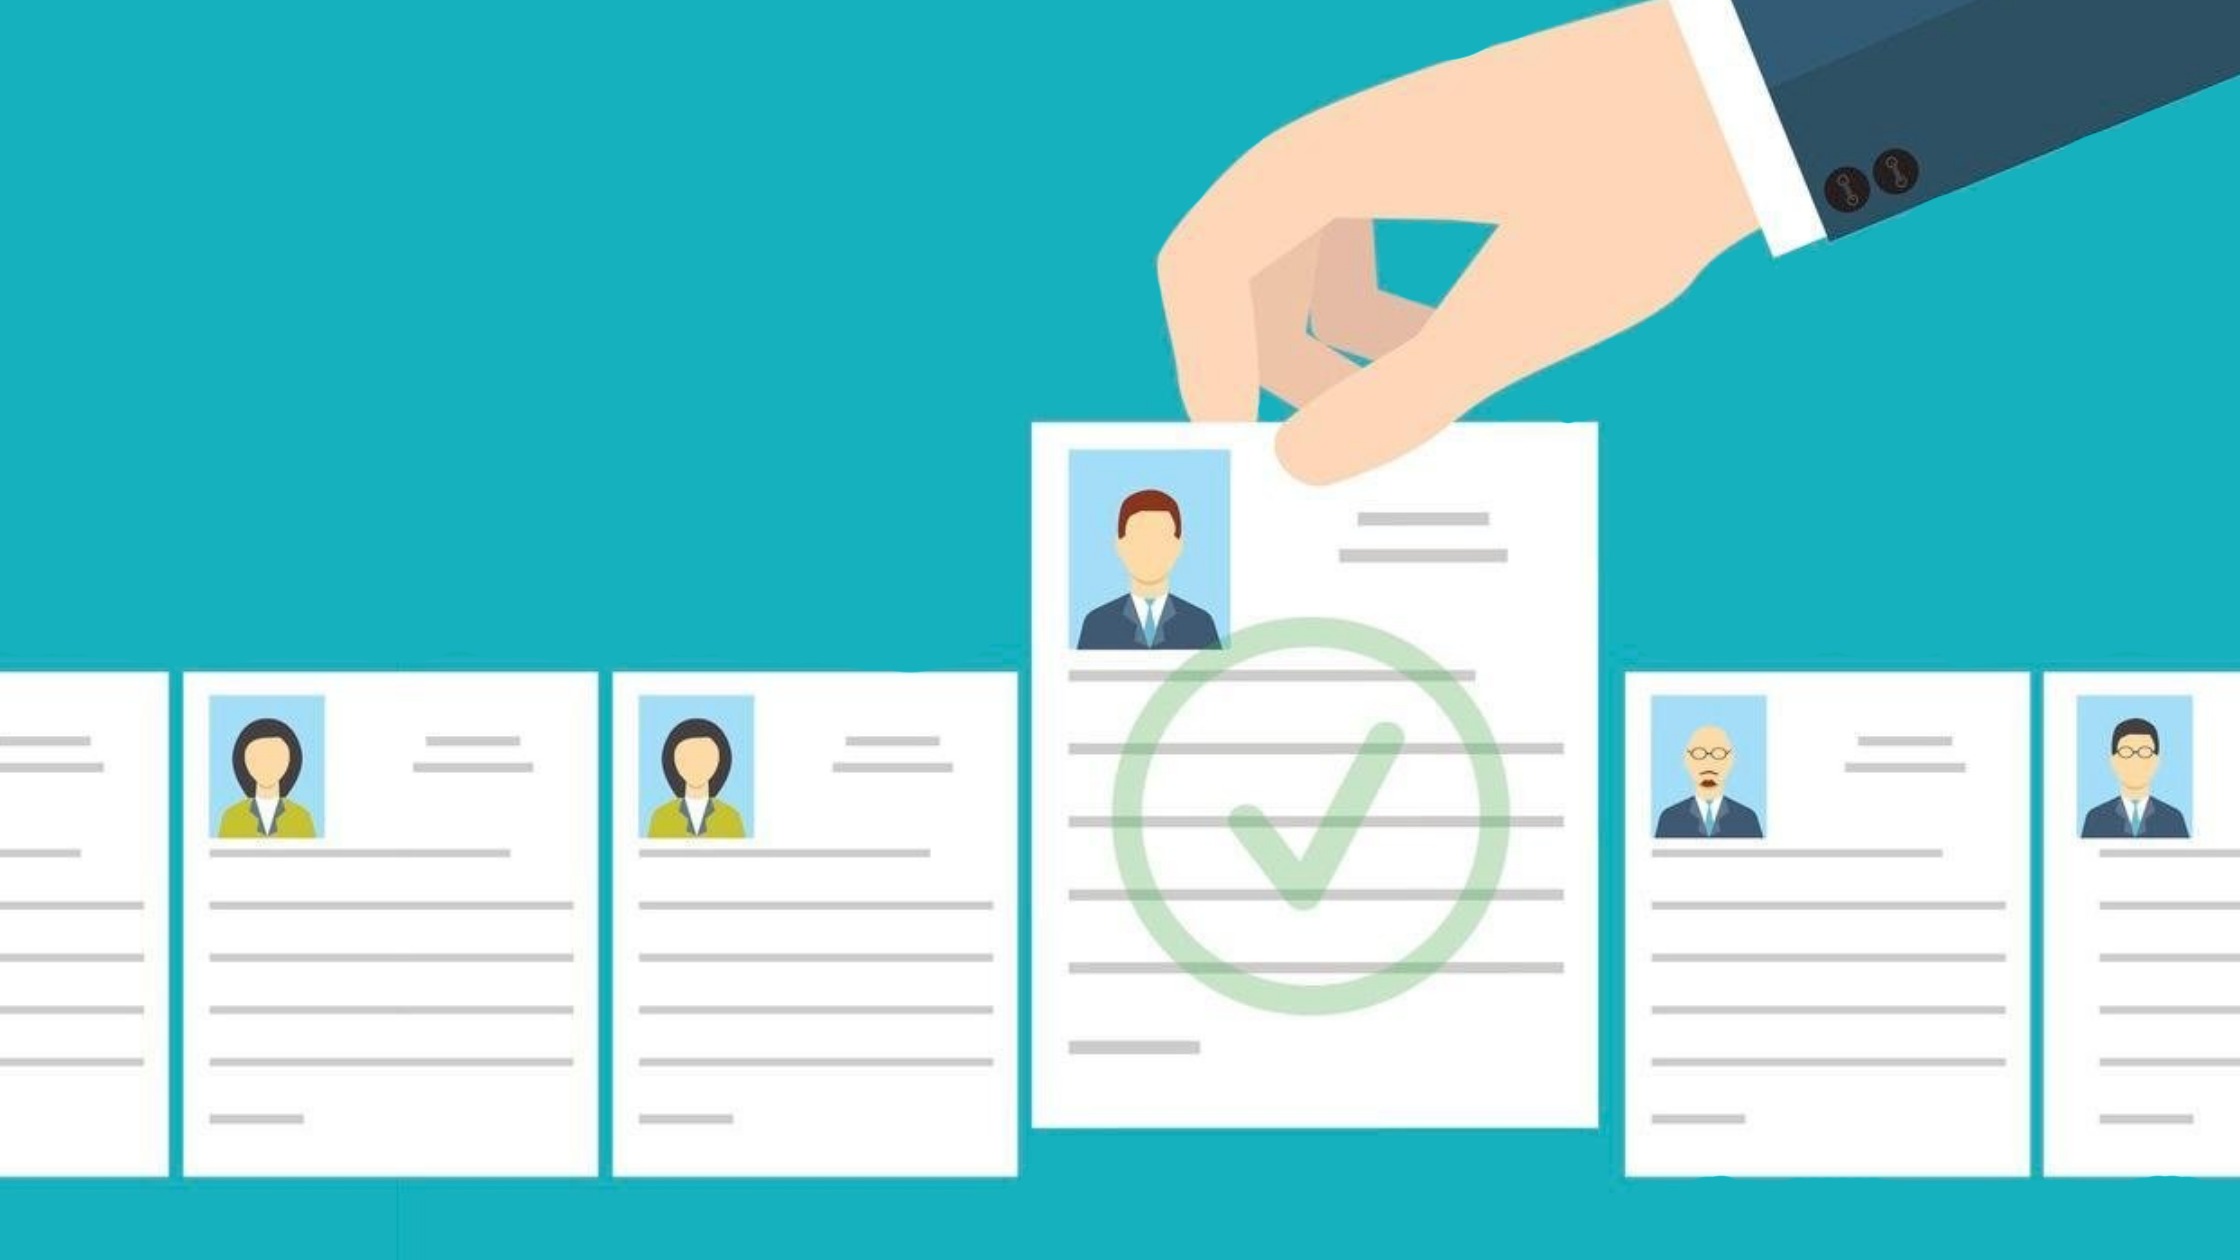 Tips to Make Your Resume Stand Out From the Crowd